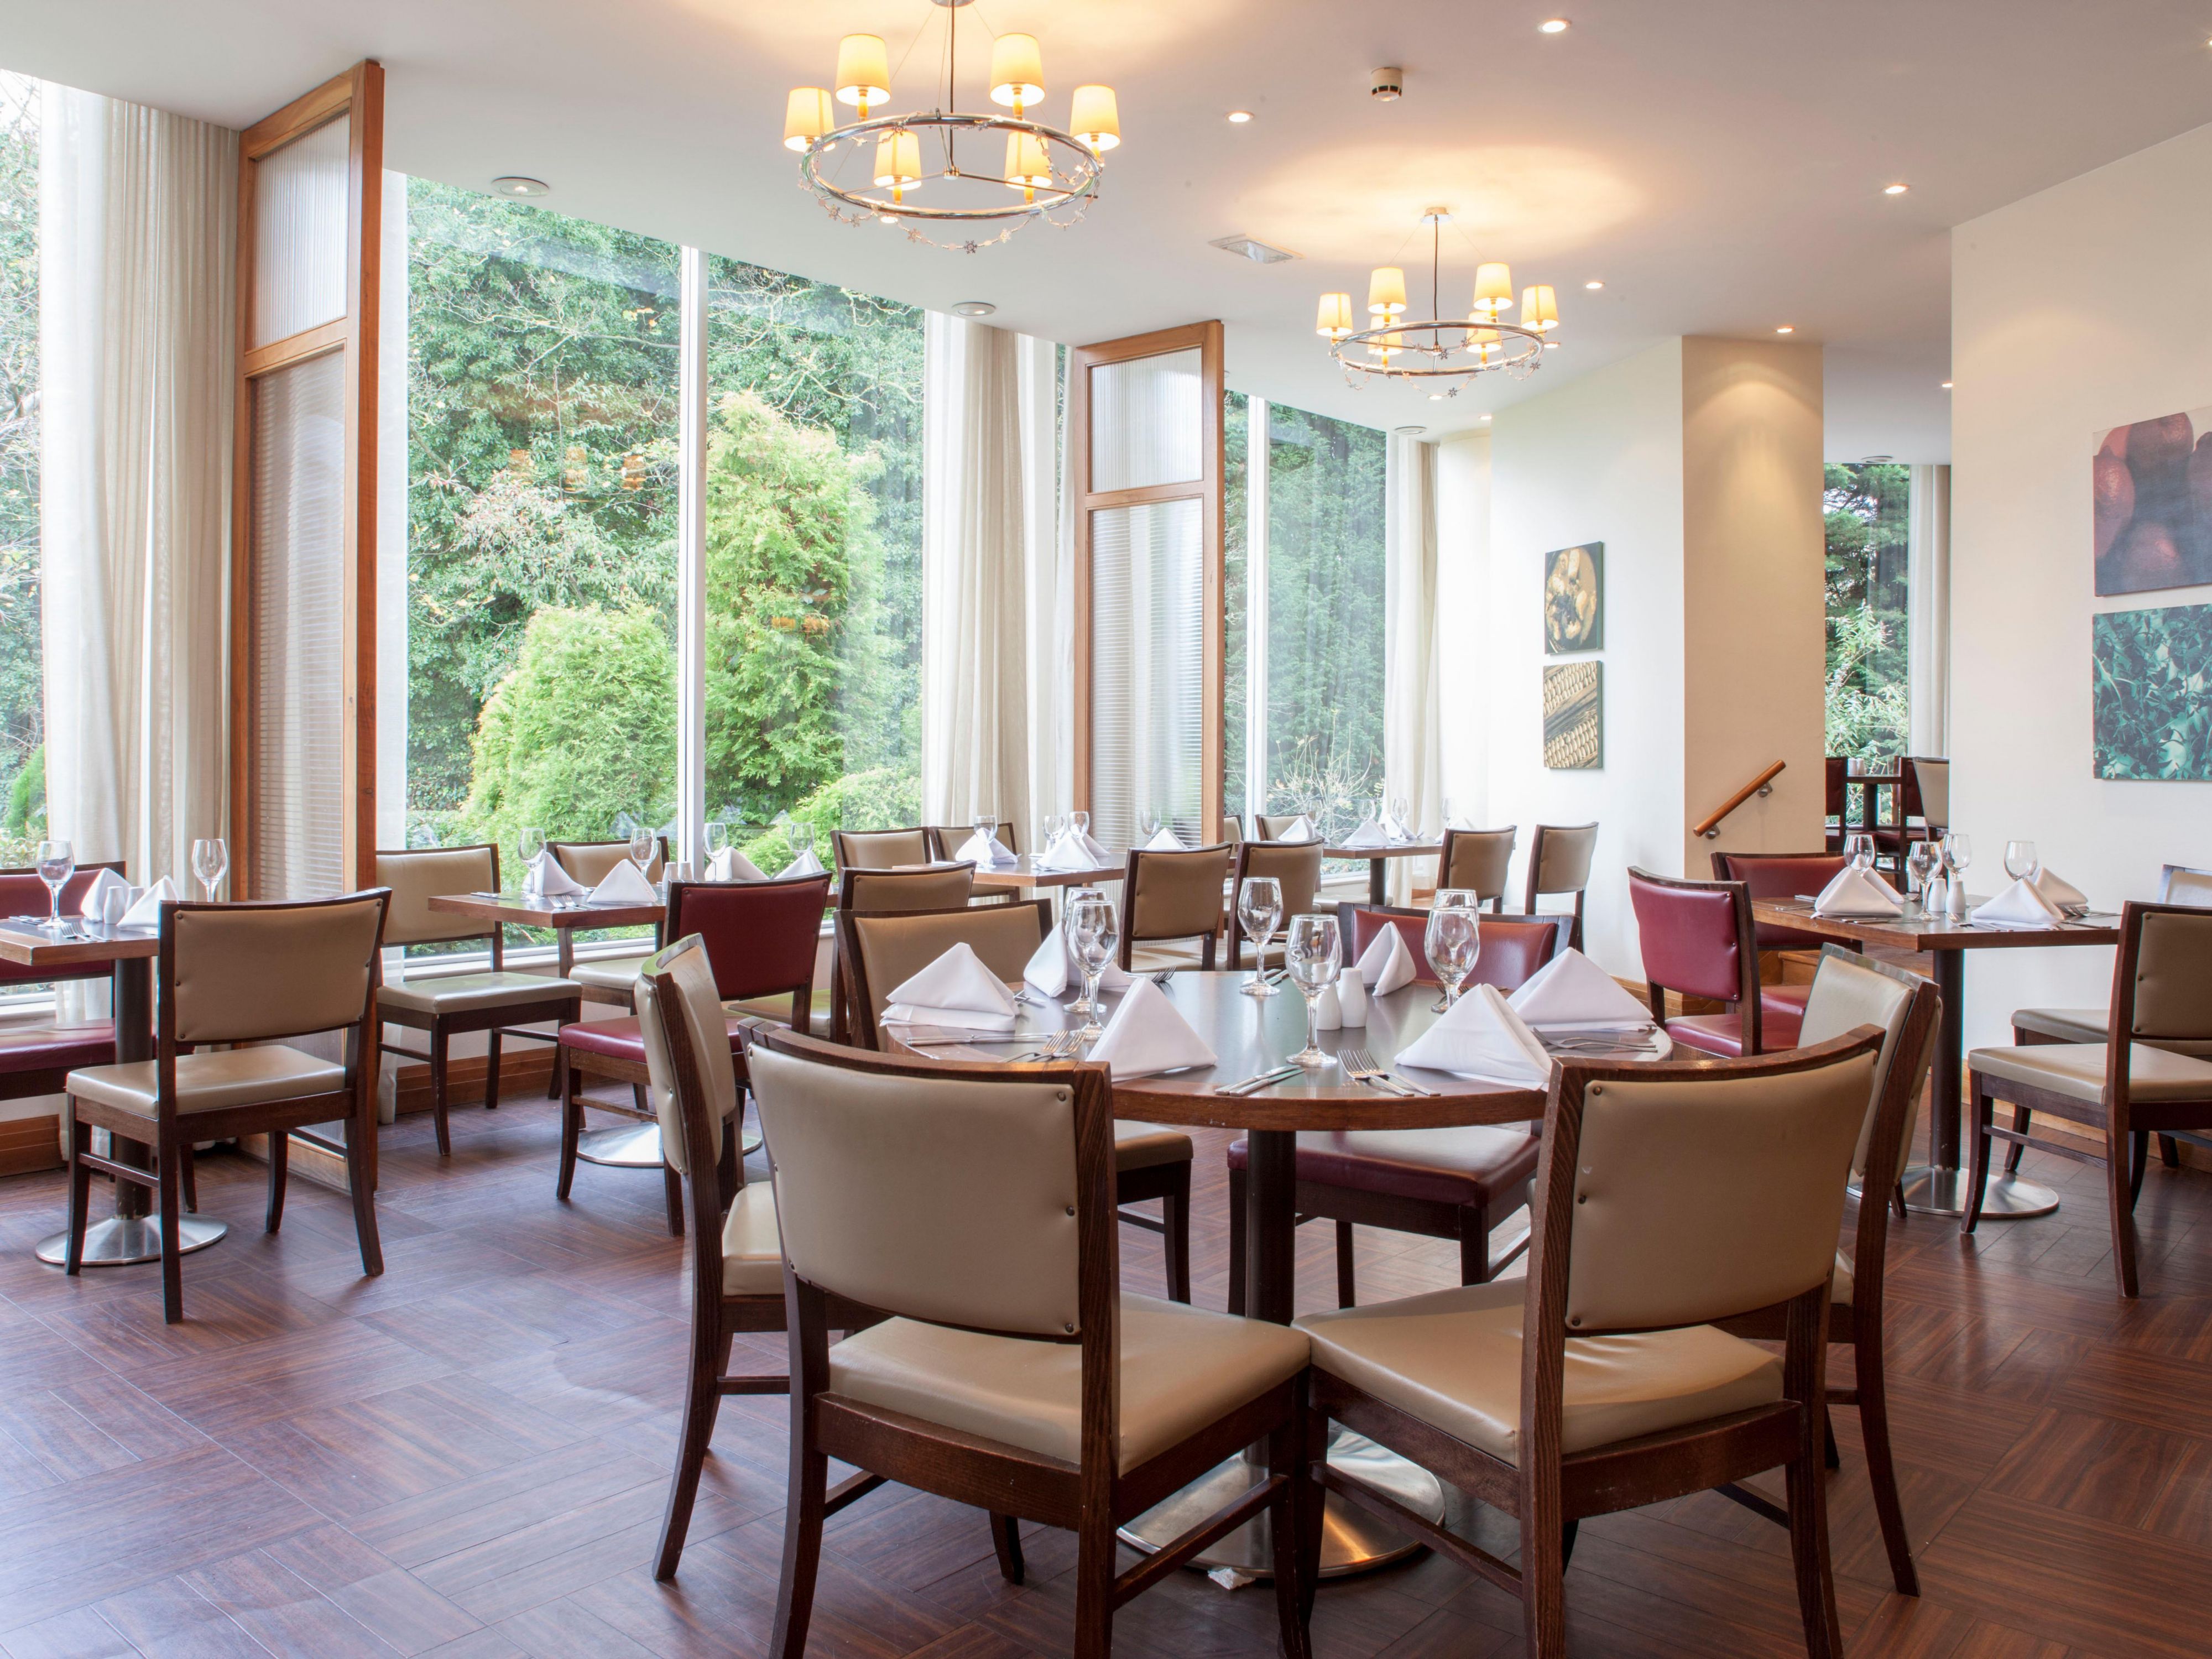 Enjoy a meal or a drink in our Regatta Lounge and Restaurant. With a broad selection of dishes from around the world, dining in our restaurant is a great way to eat, drink and socialise. We also have ample outdoor seating so you can enjoy a spot of al fresco dining on warmer days.
